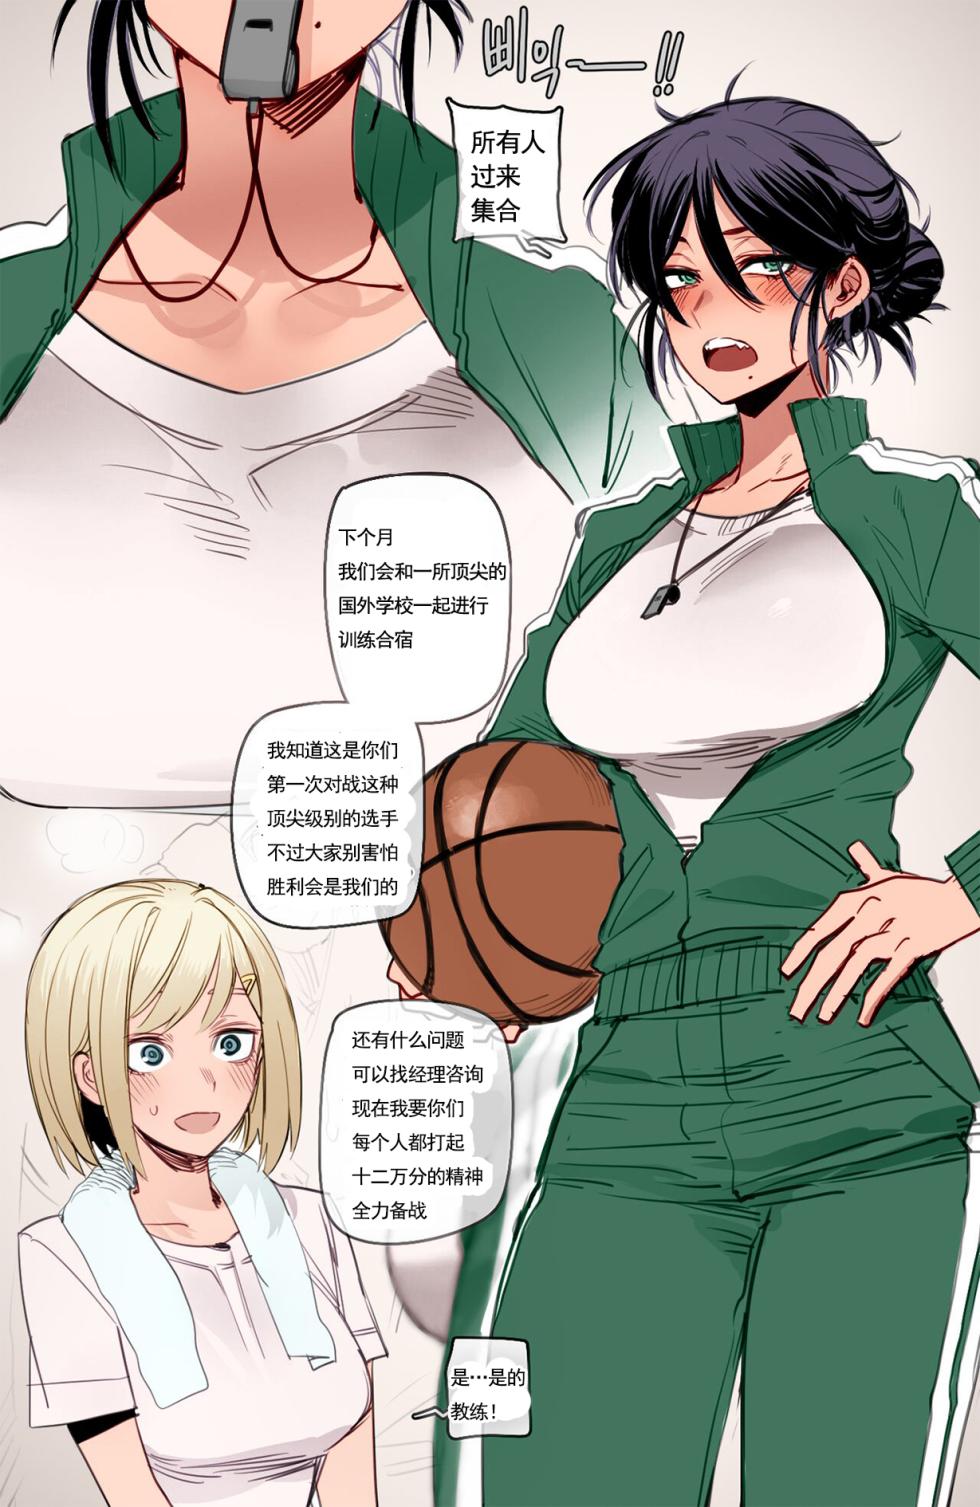 [ratatatat74] Blacked Coach 媚黑教练[Chinese][Colorized][挽歌个人汉化] - Page 1